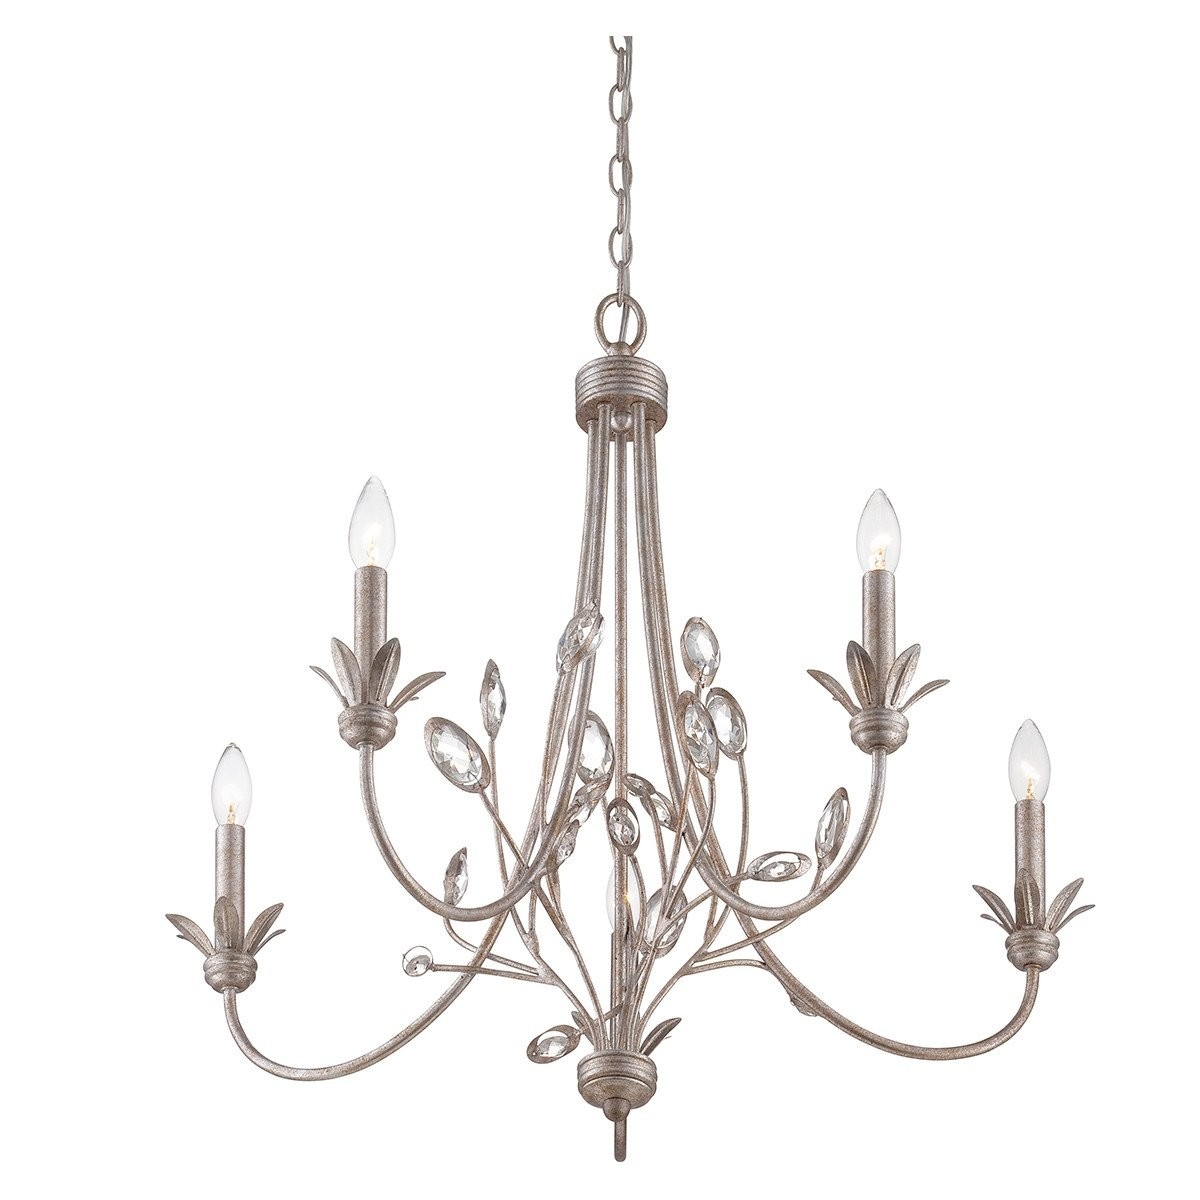 Uql2710 french country country chandelier 27 h x 26 w